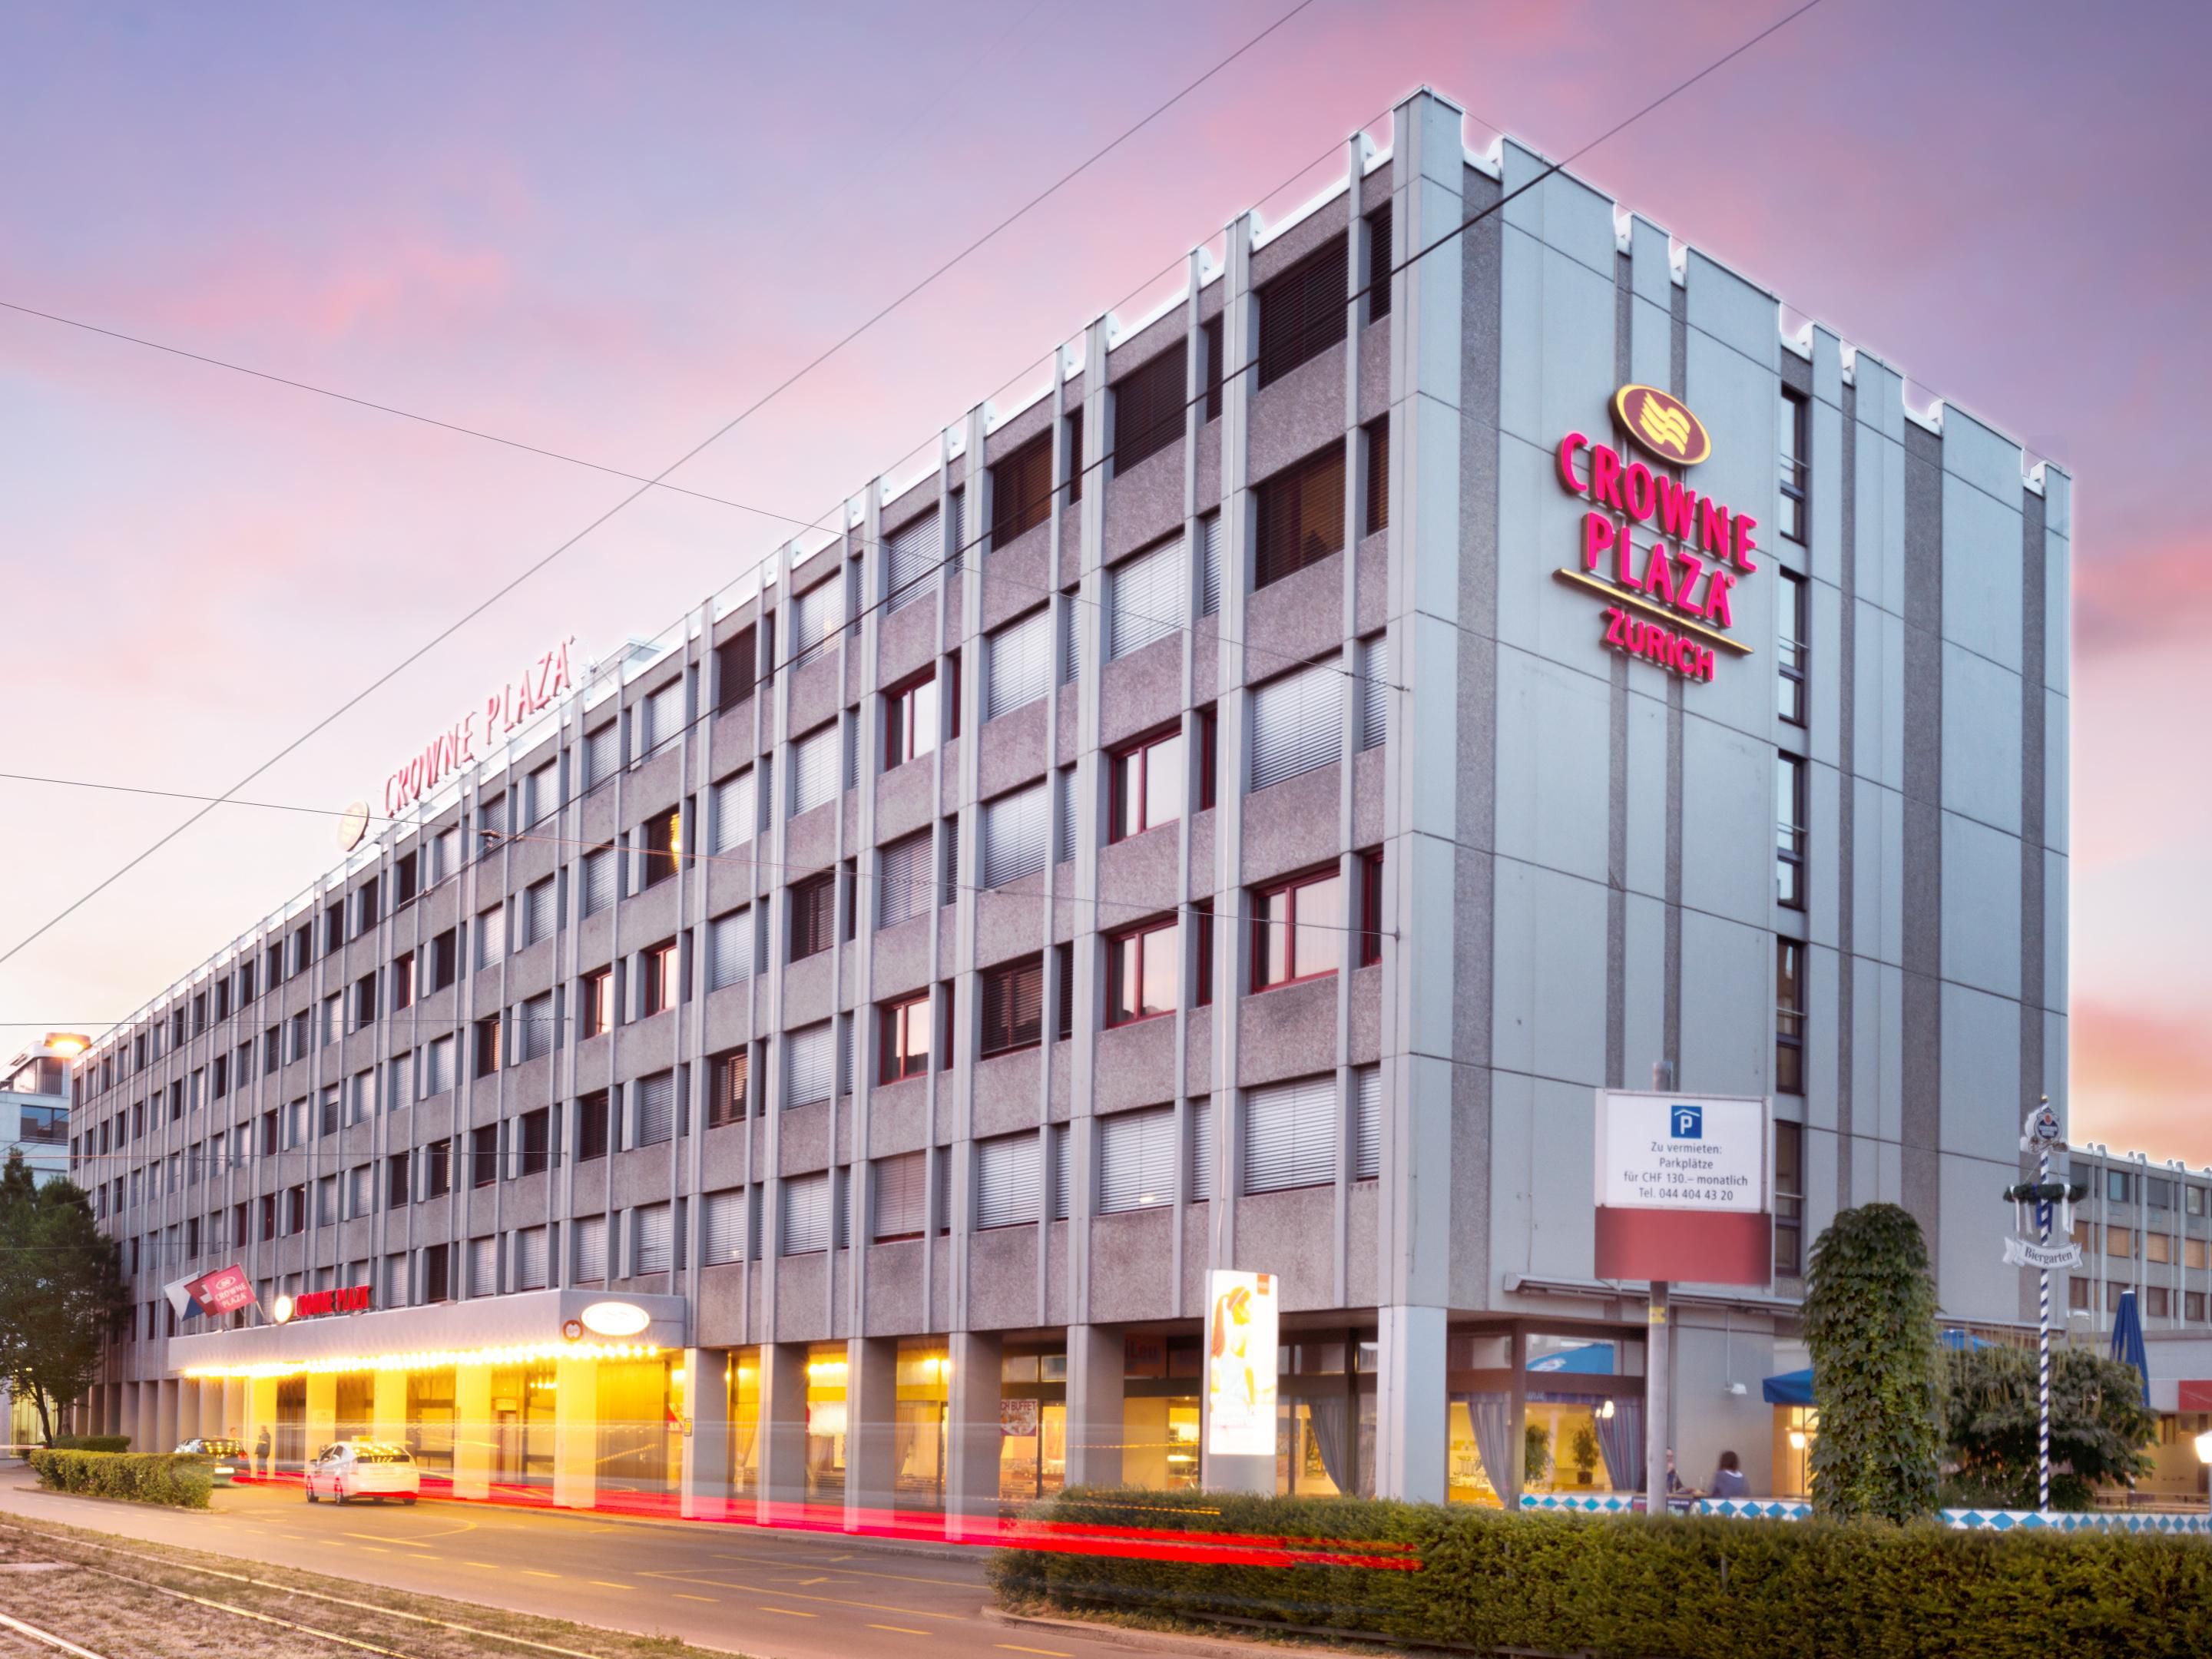 Crowne Plaza Zurich offers 550 car parking spaces, including 4 electric vehicle charging spaces and a dedicated parking area for women near the lift. Our parking fee is 35.00 CHF per day. 